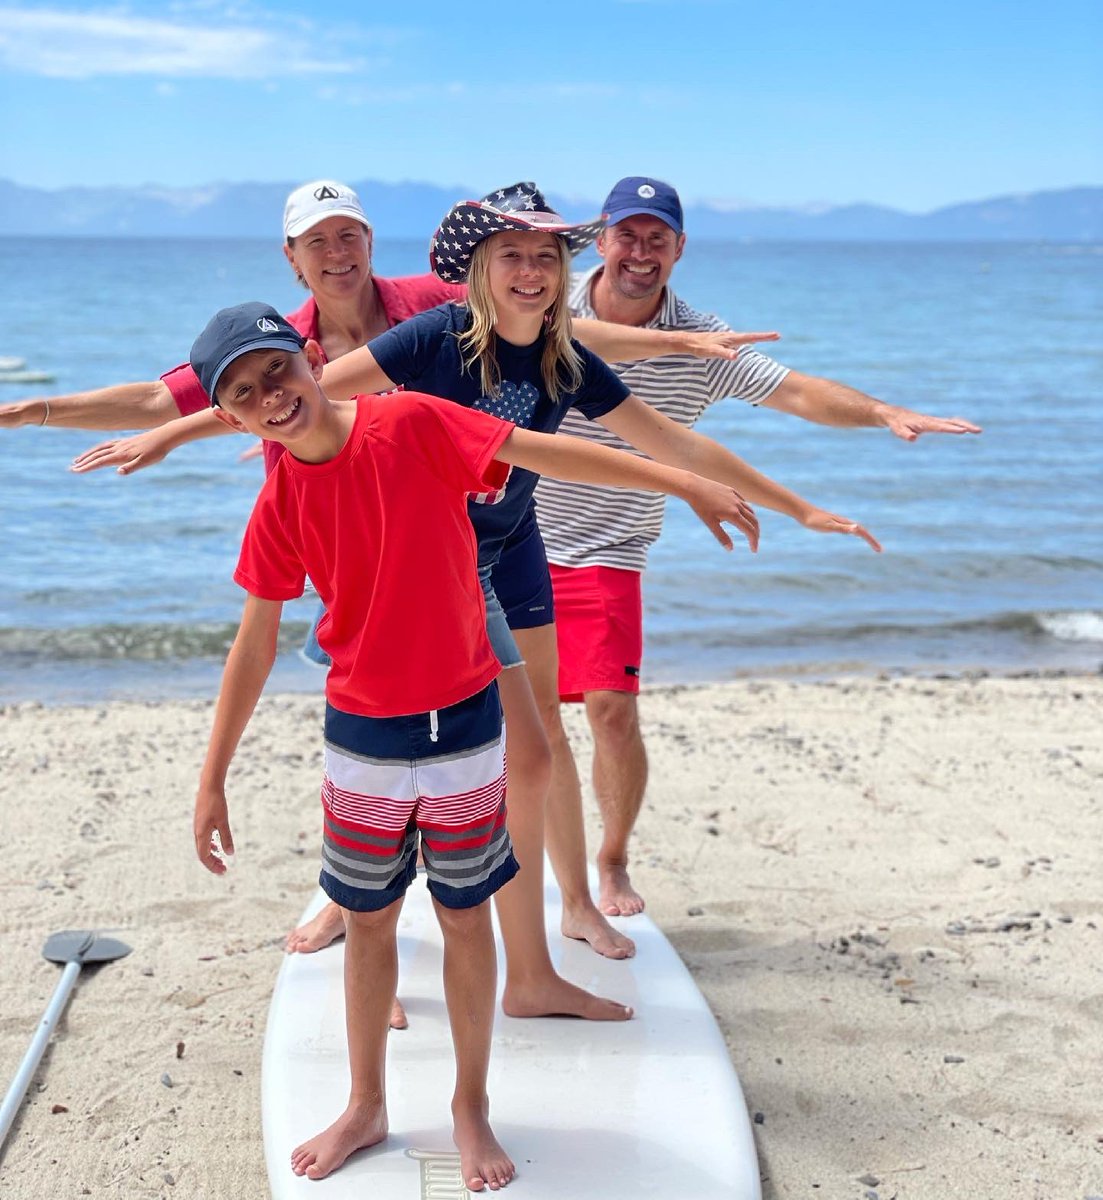 Happy 4th! #IndependenceDay2021 #family 🇺🇸🍾 #tahoe #freedom #lucky 